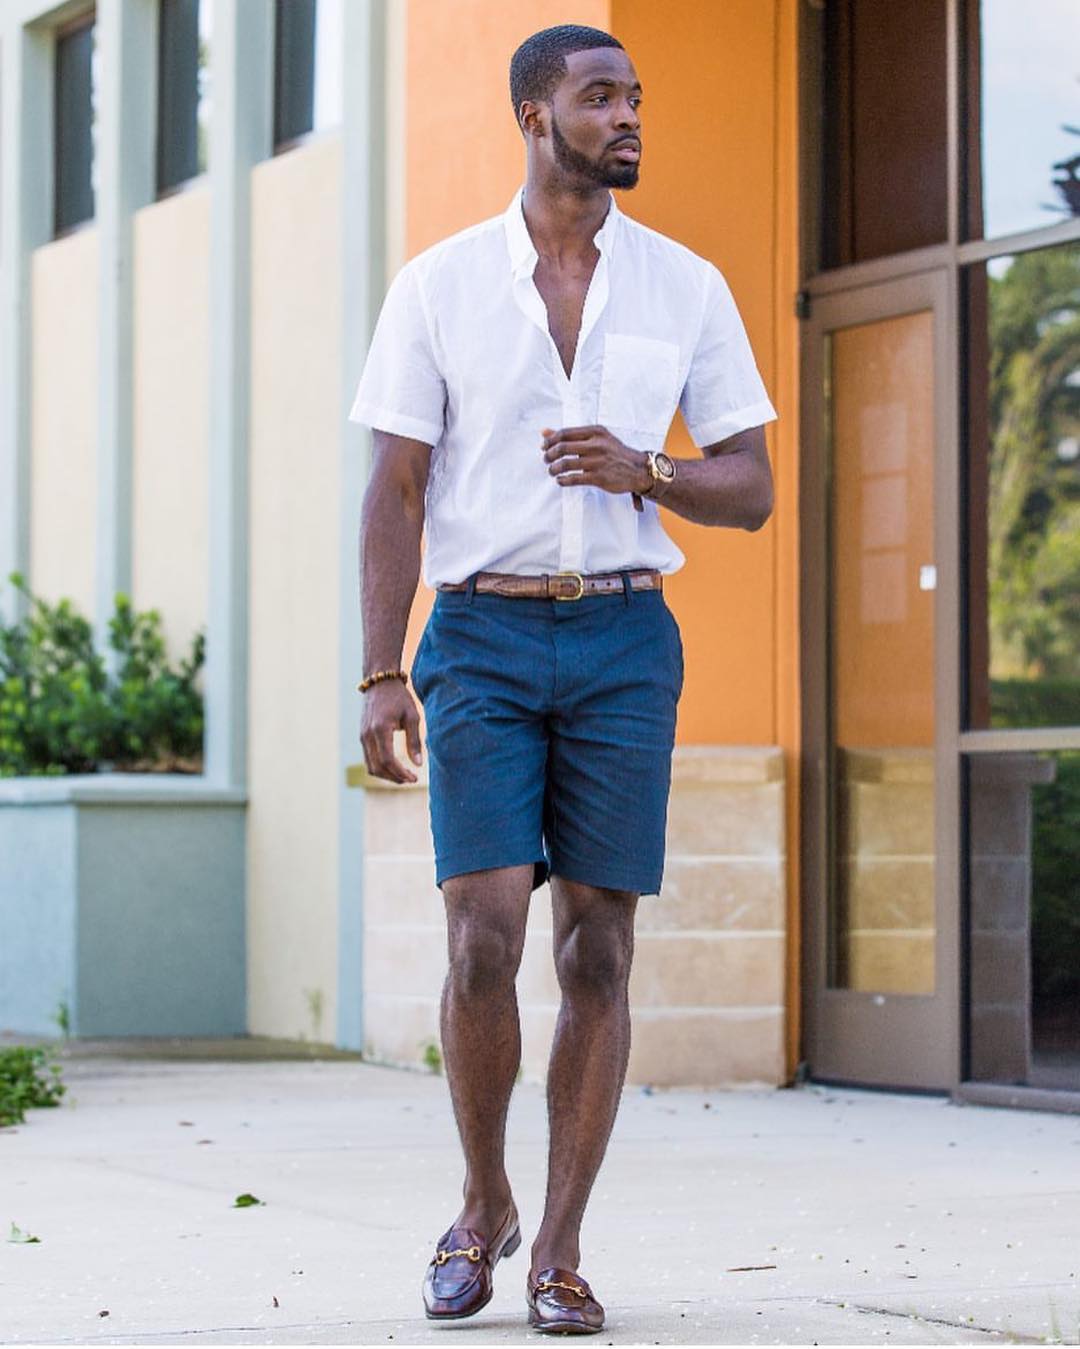 Men Can Be Stylish And Hot Too! Check Out These Sizzling Male Styles